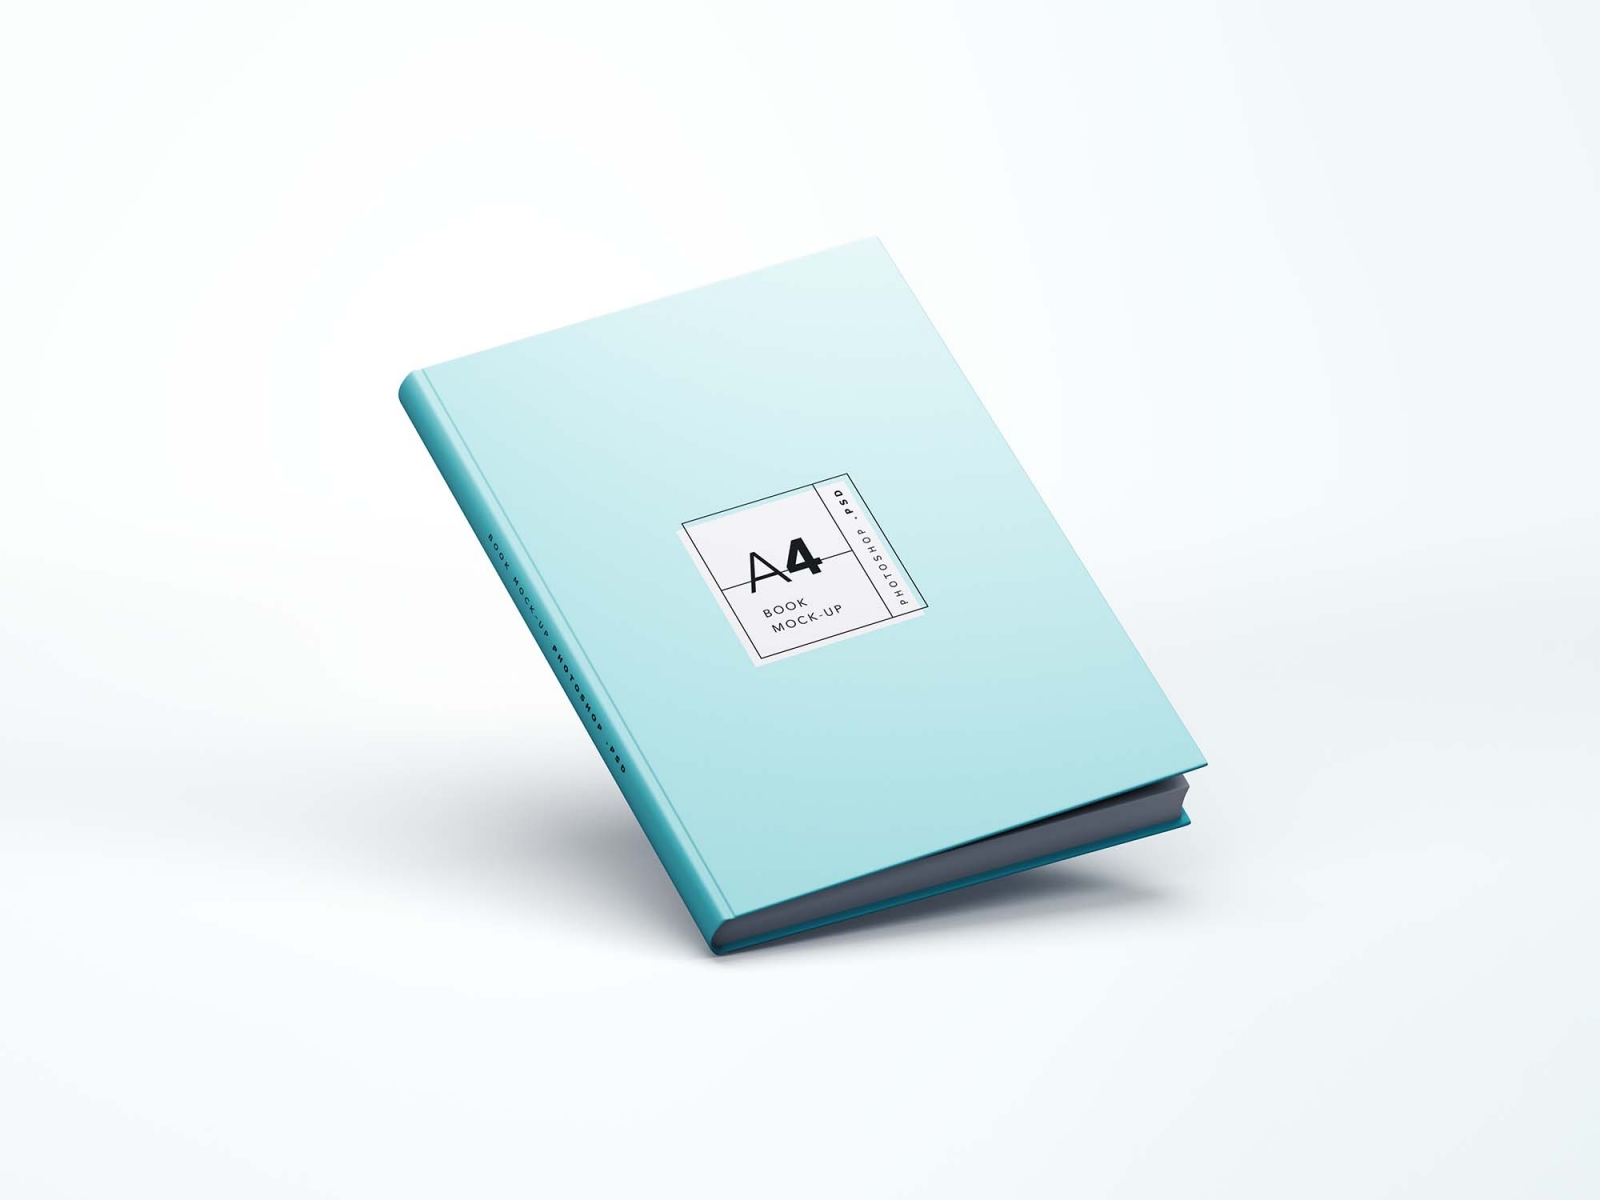 An elegantly designed light blue A4 book mockup lying on a clean, white surface.